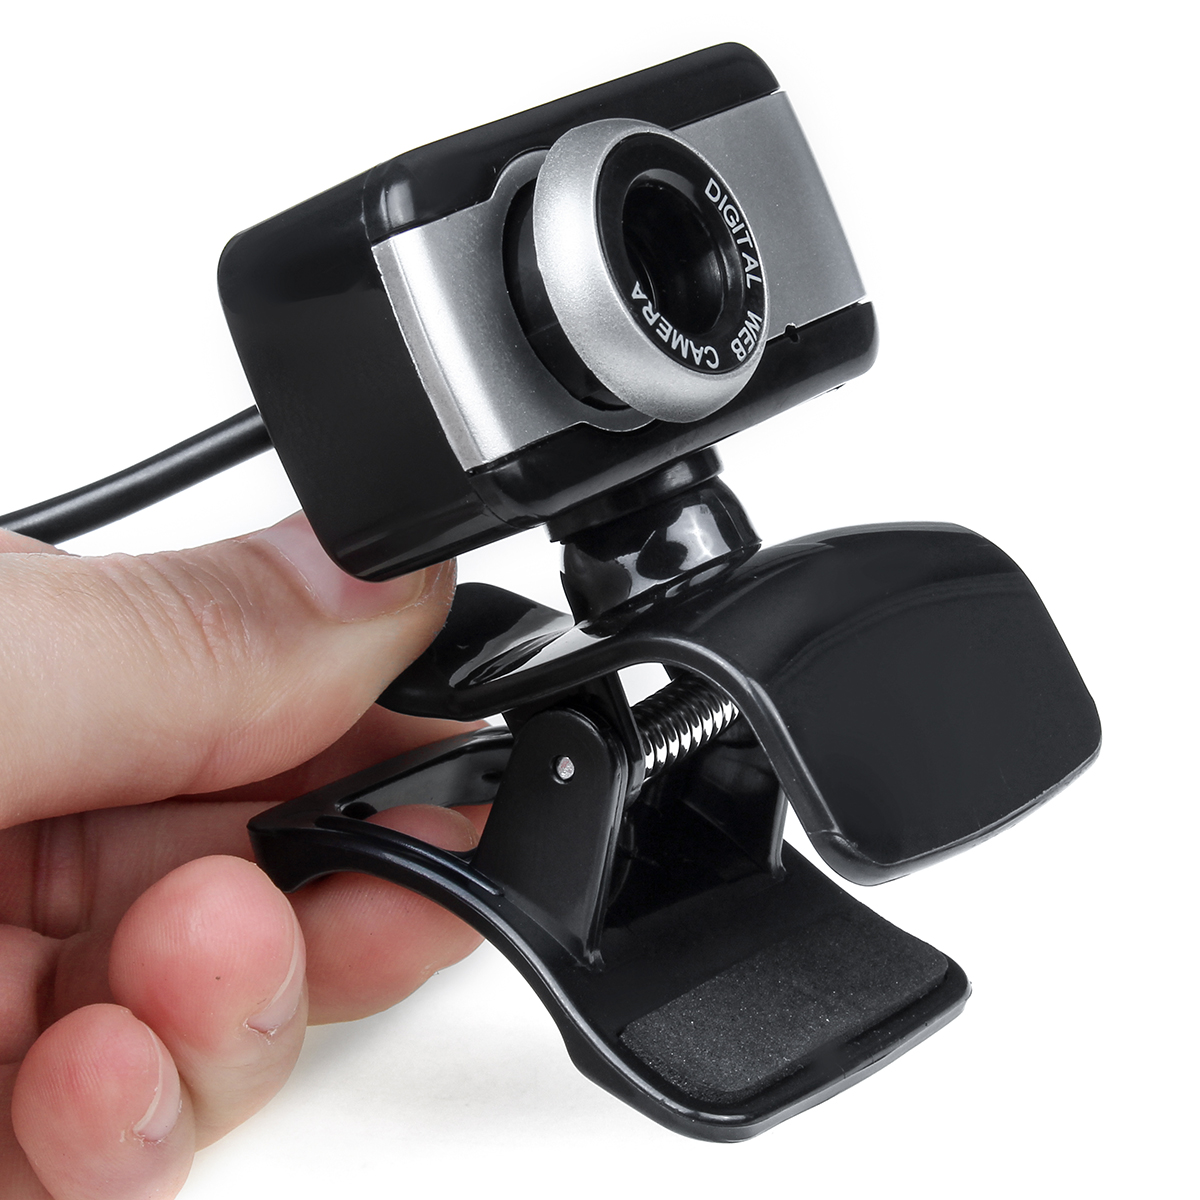 Bakeey-720P480P-HD-Wide-Angle-USB-Webcam-Conference-Live-Auto-Focusing-Computer-Camera-Built-in-Nois-1688586-14